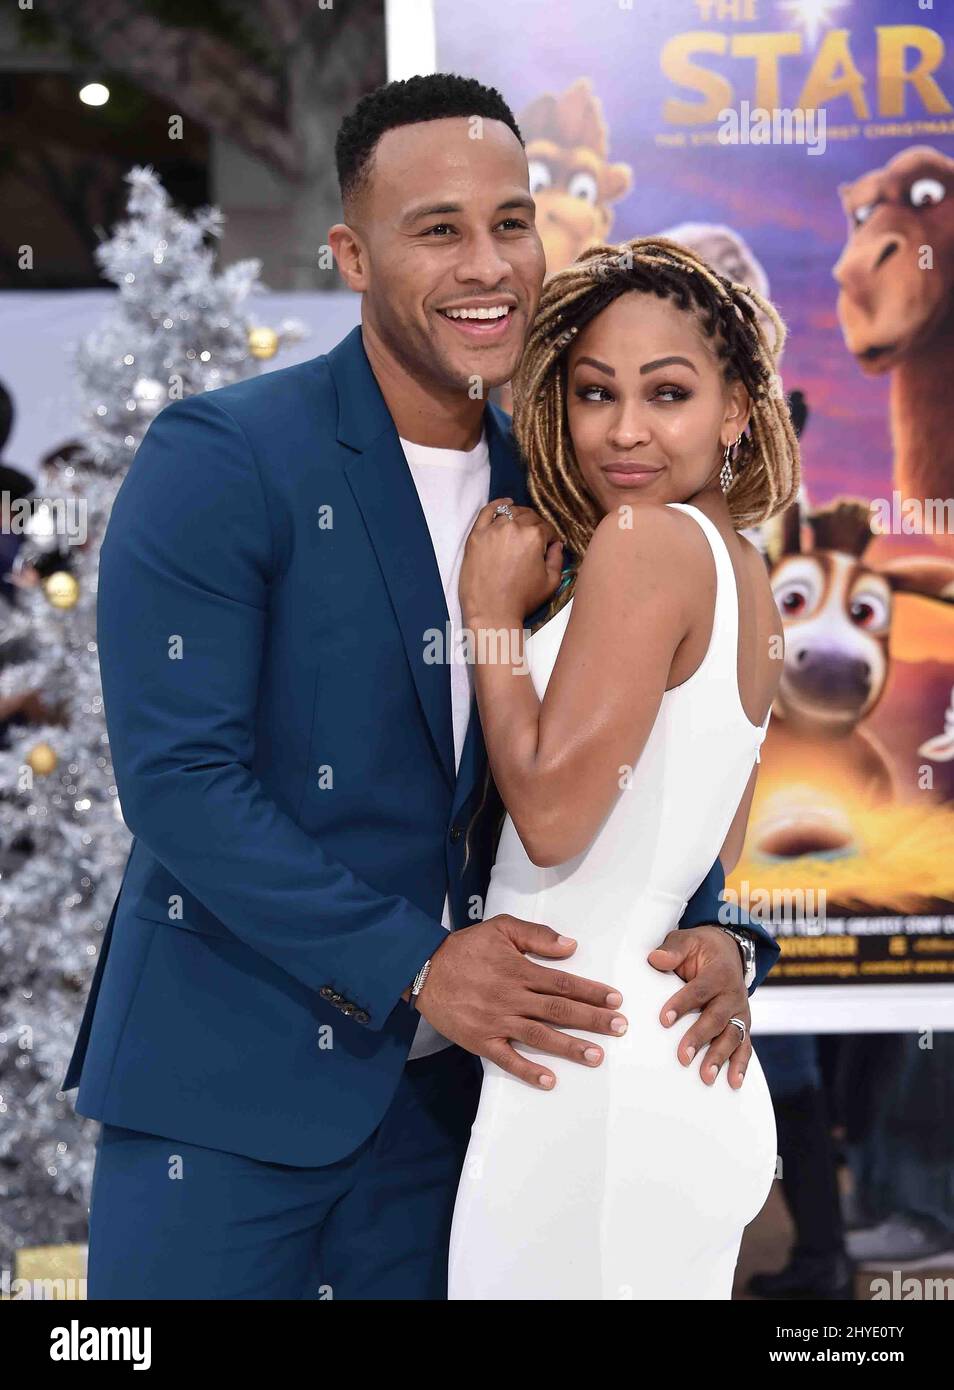 Devon Franklin and Meagan Good attending the world premiere of The Star, in Los Angeles, California Stock Photo